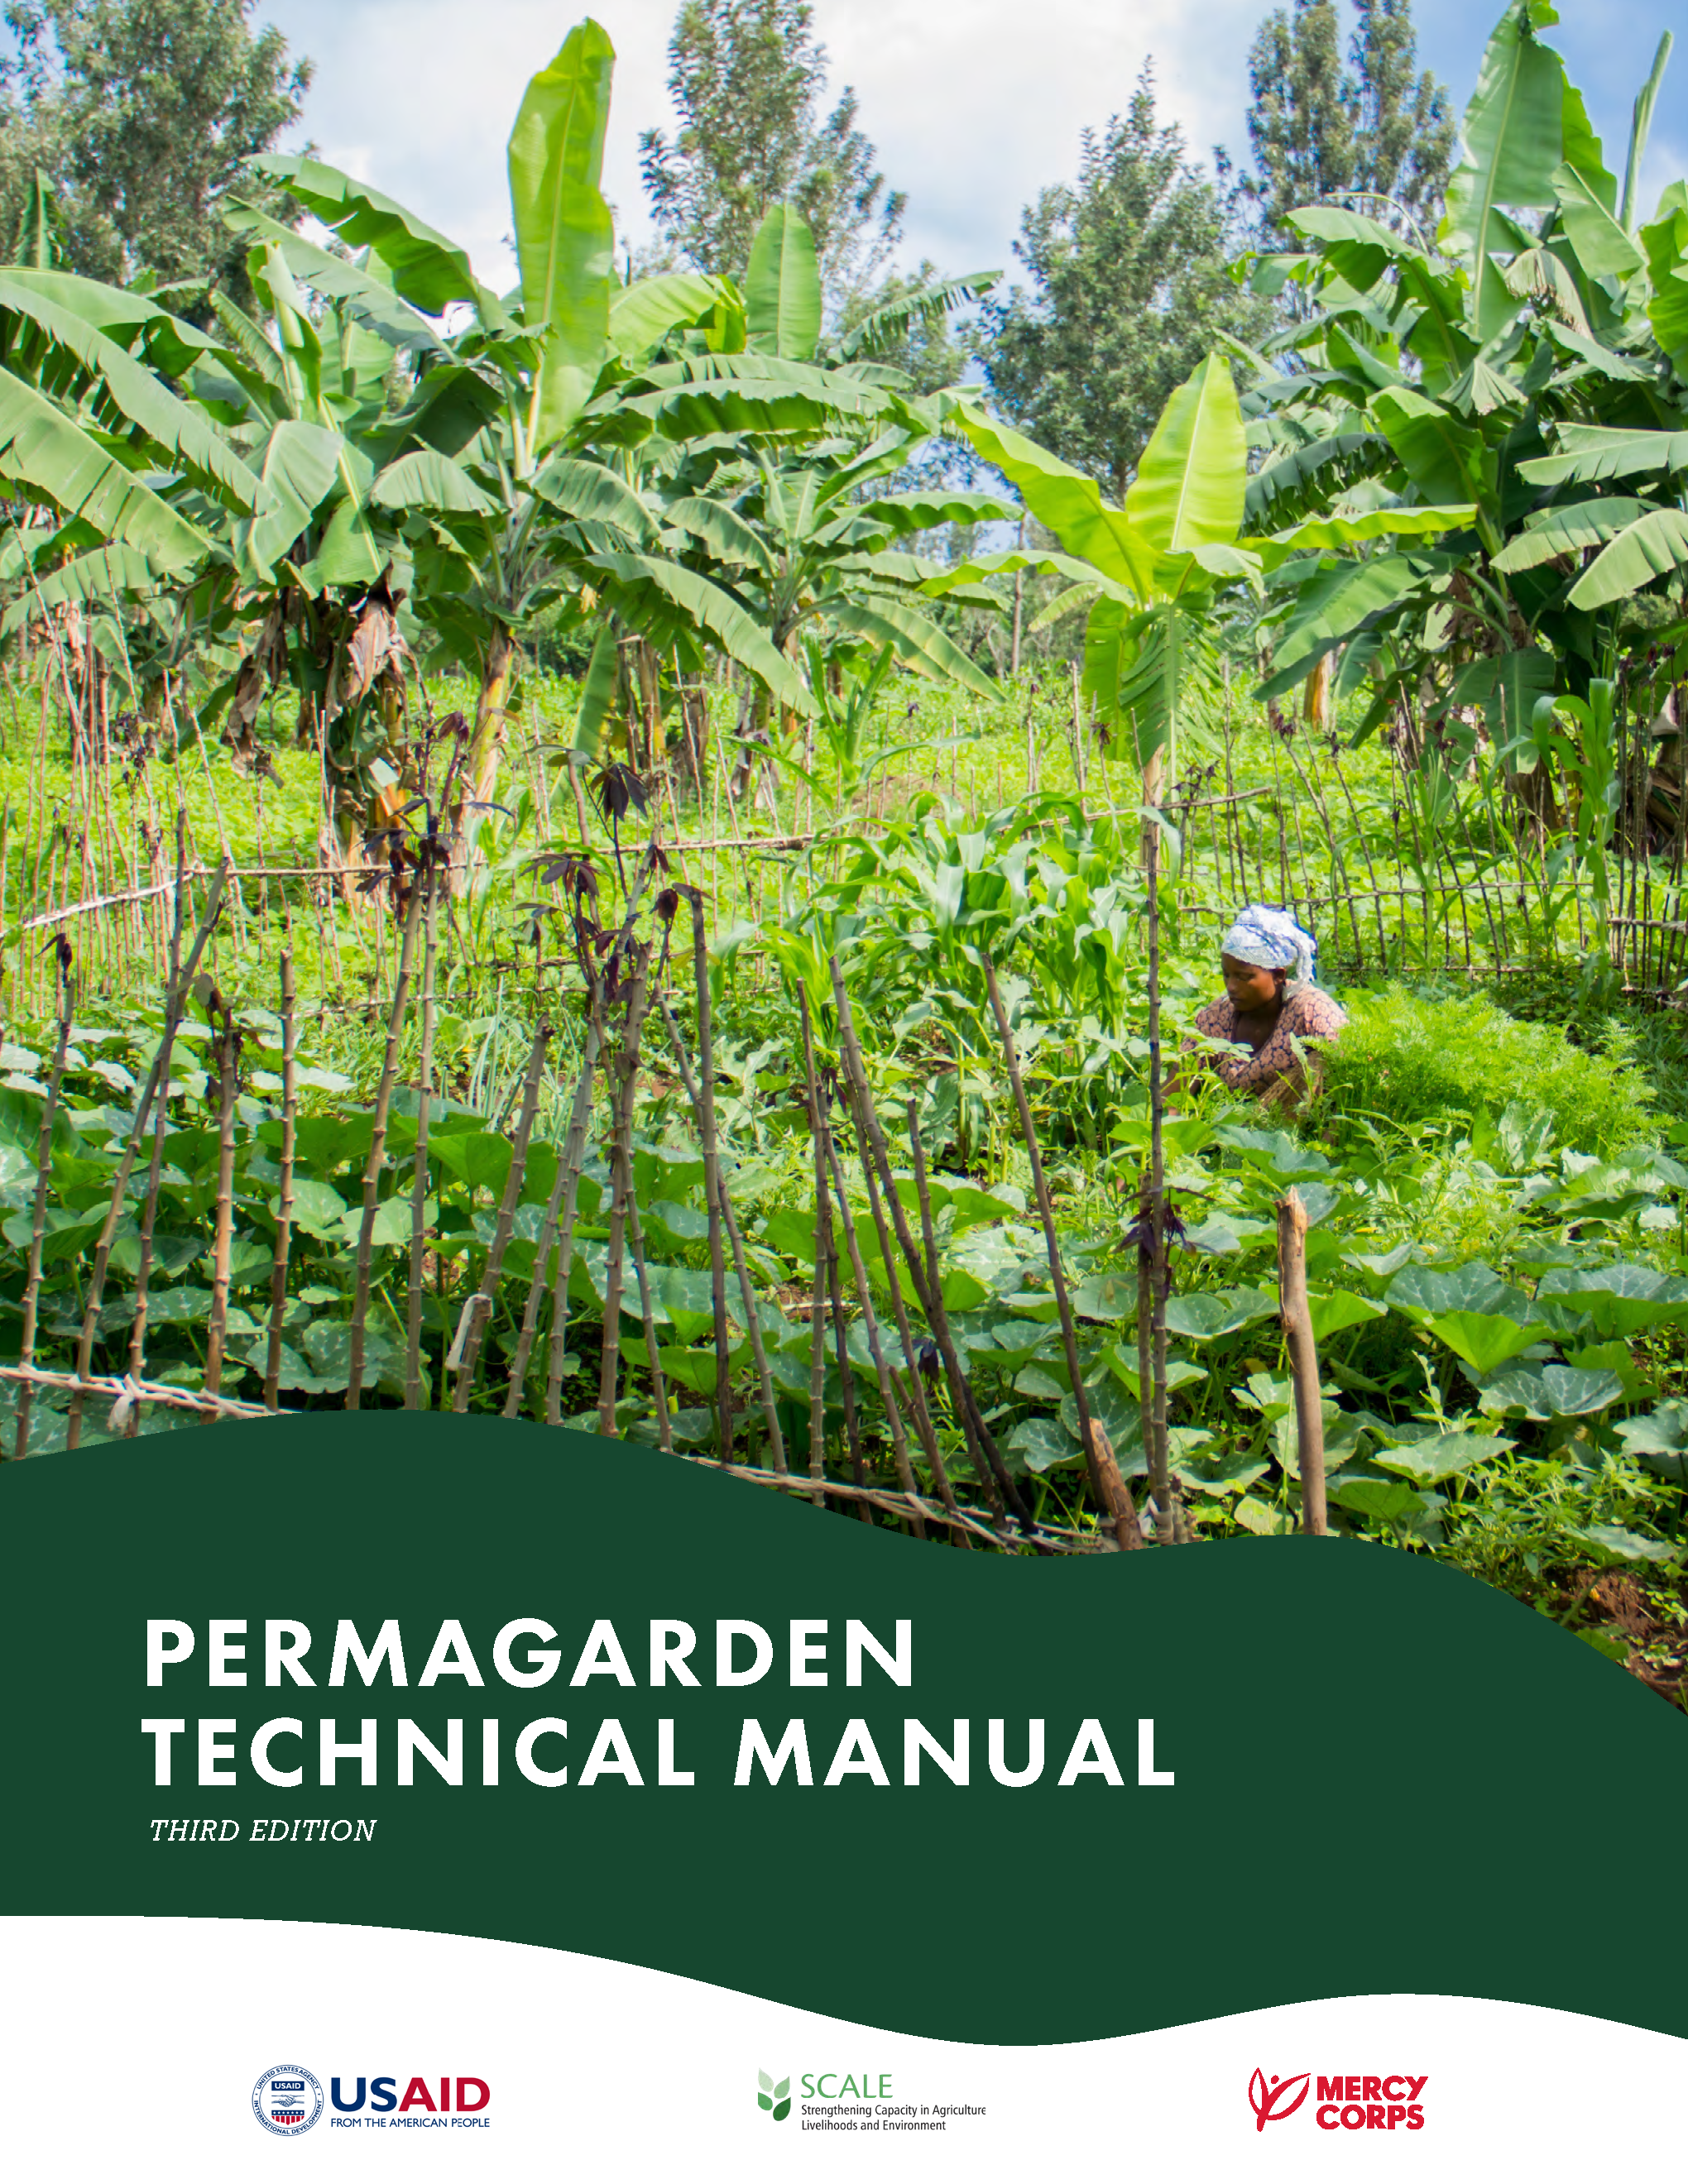 Cover page for Permagarden Technical Manual